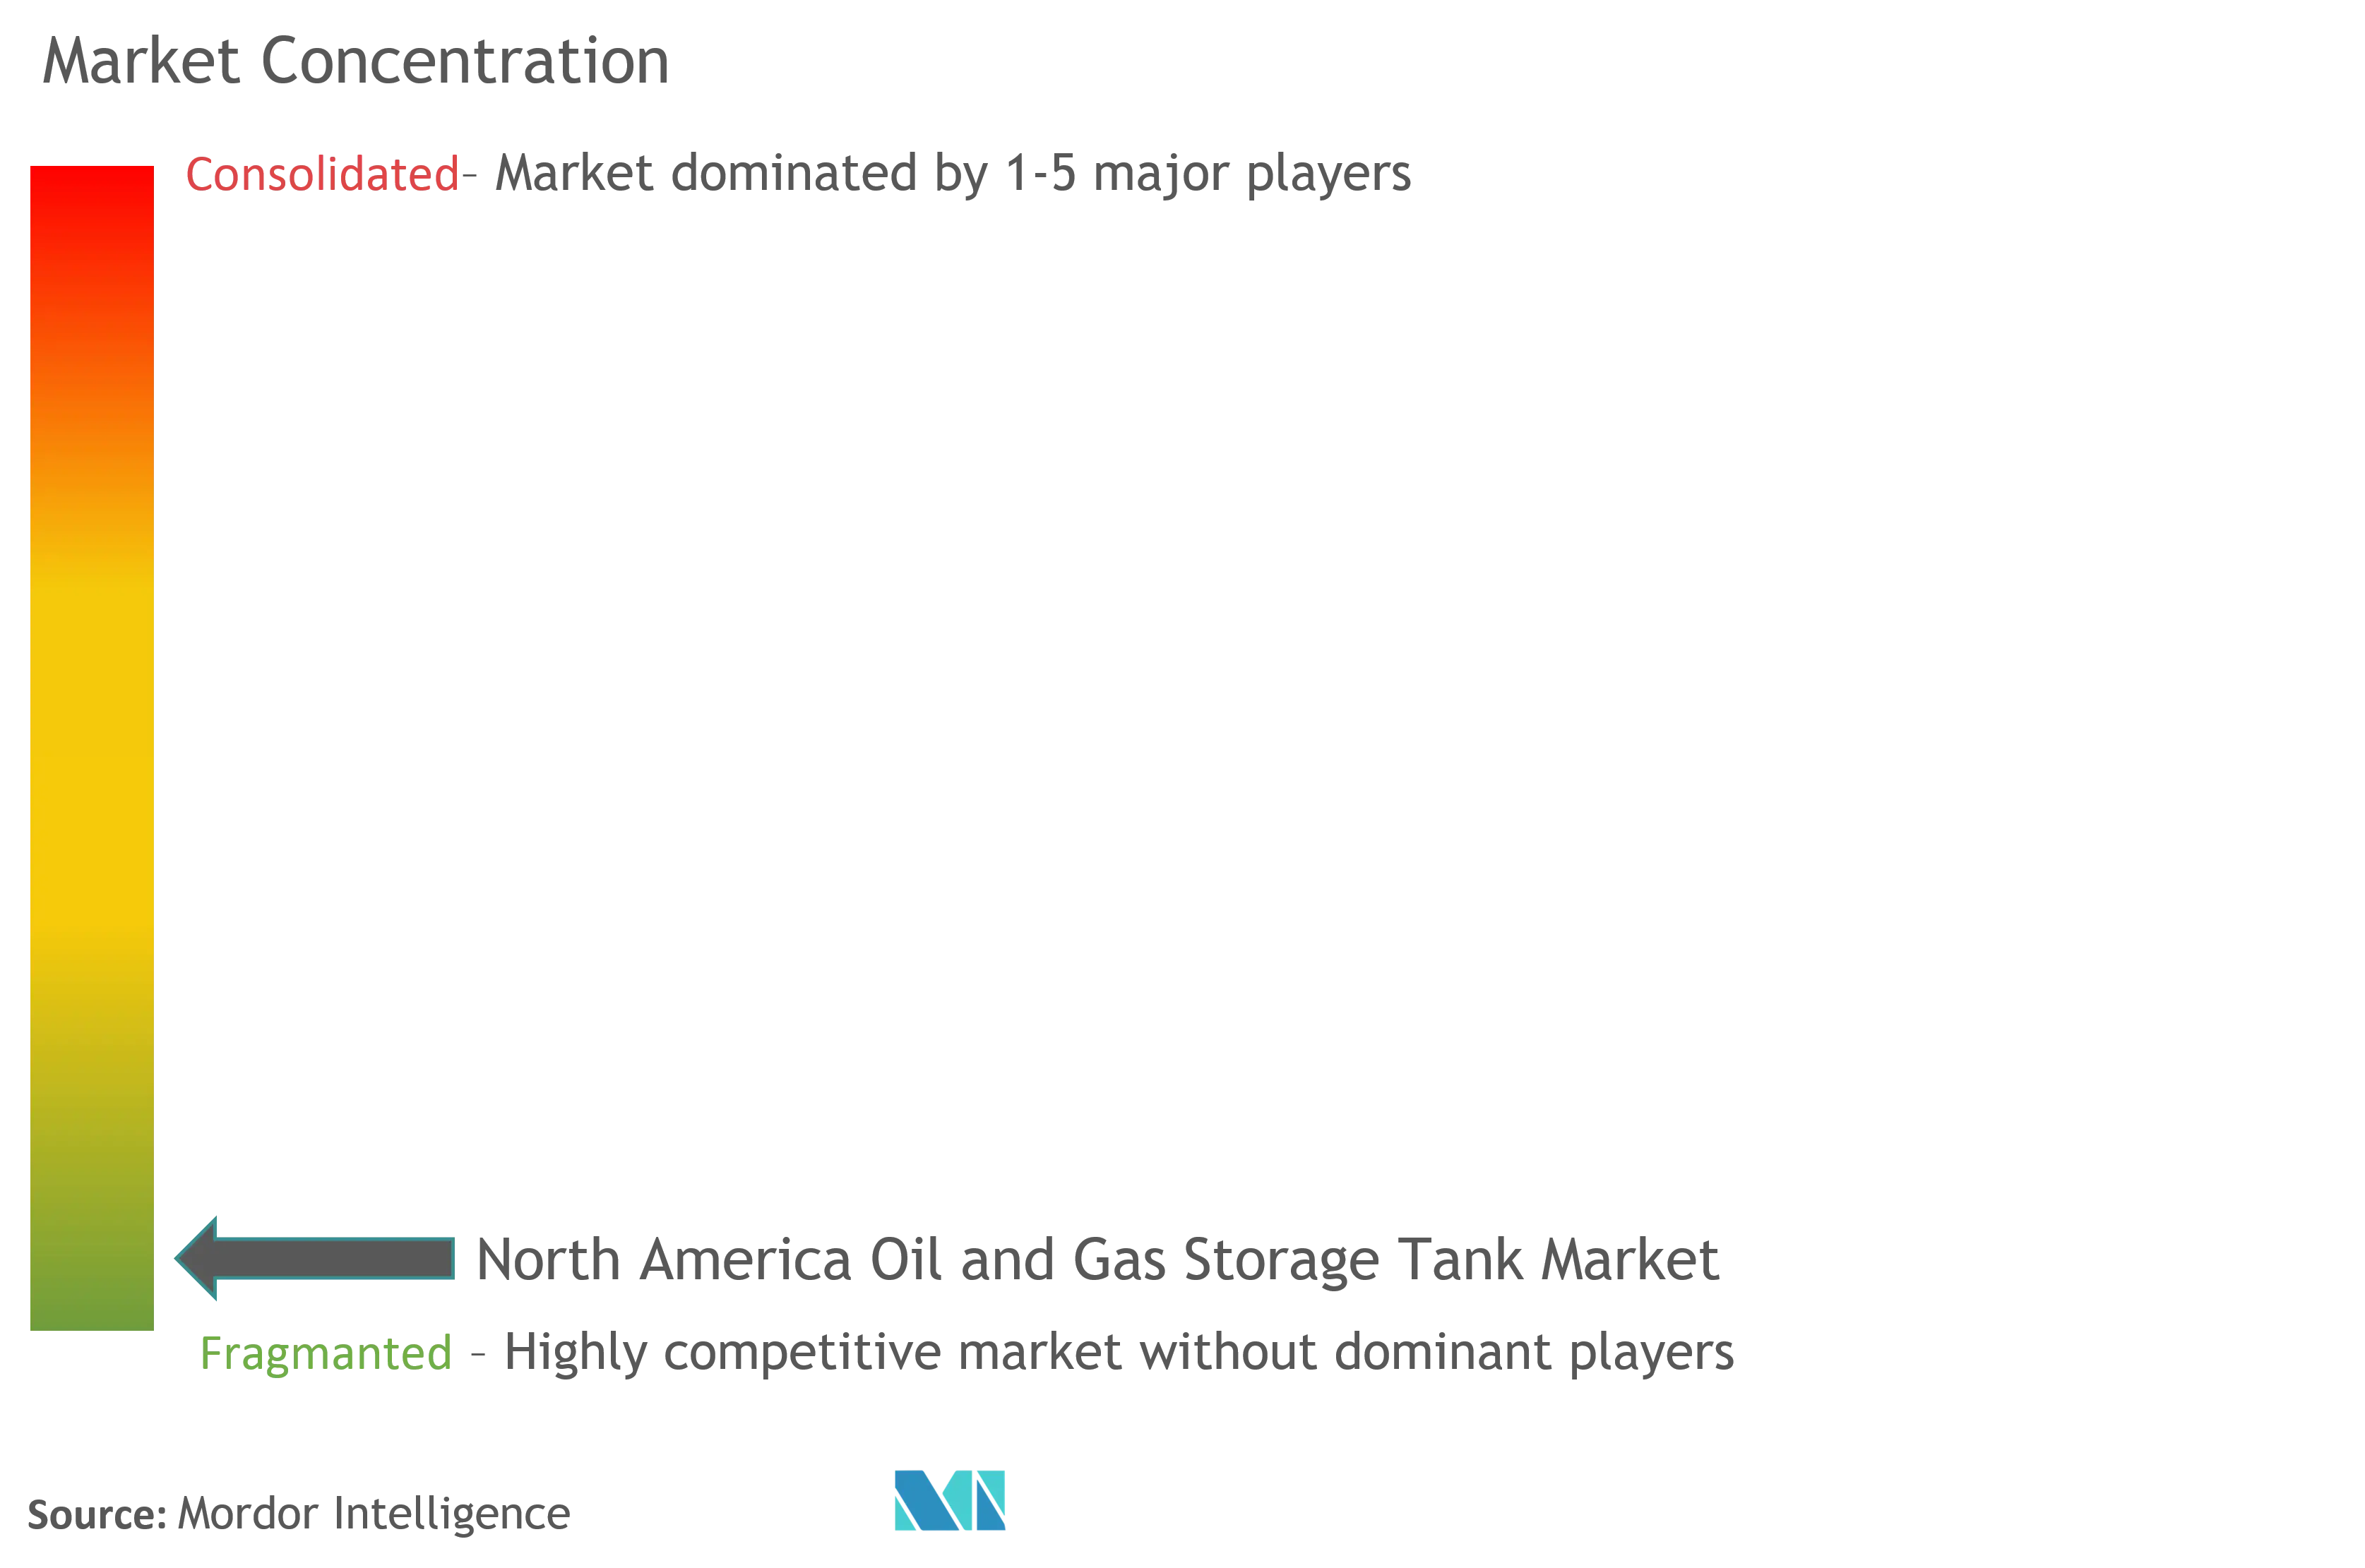 North America Oil and Gas Storage Tank Market Concentration